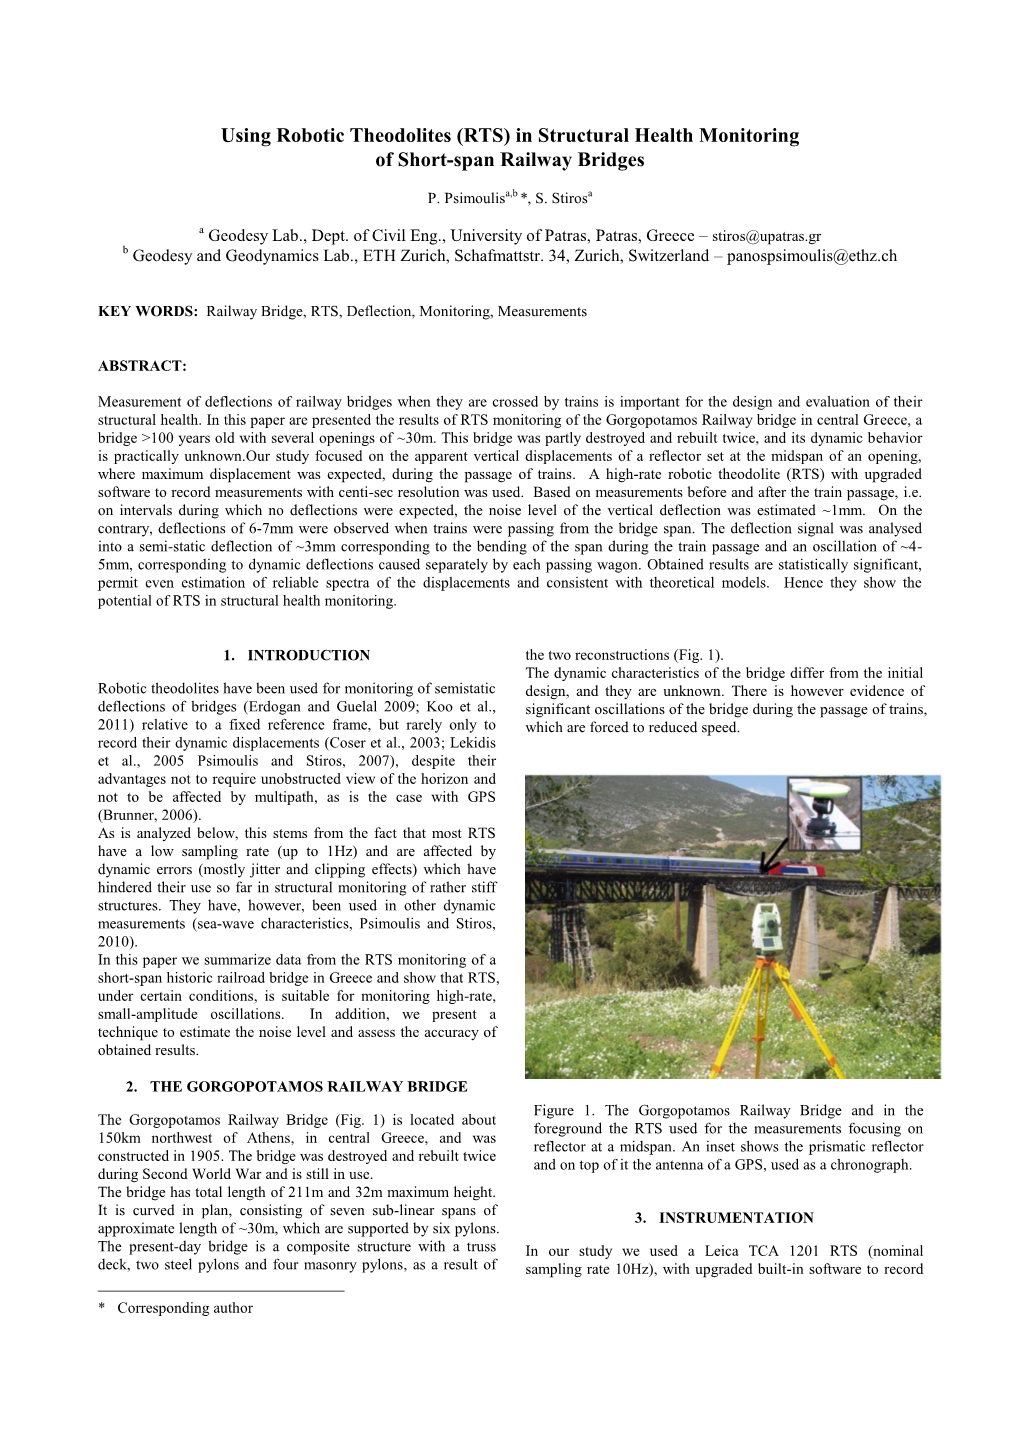 (RTS) in Structural Health Monitoring of Short-Span Railway Bridges